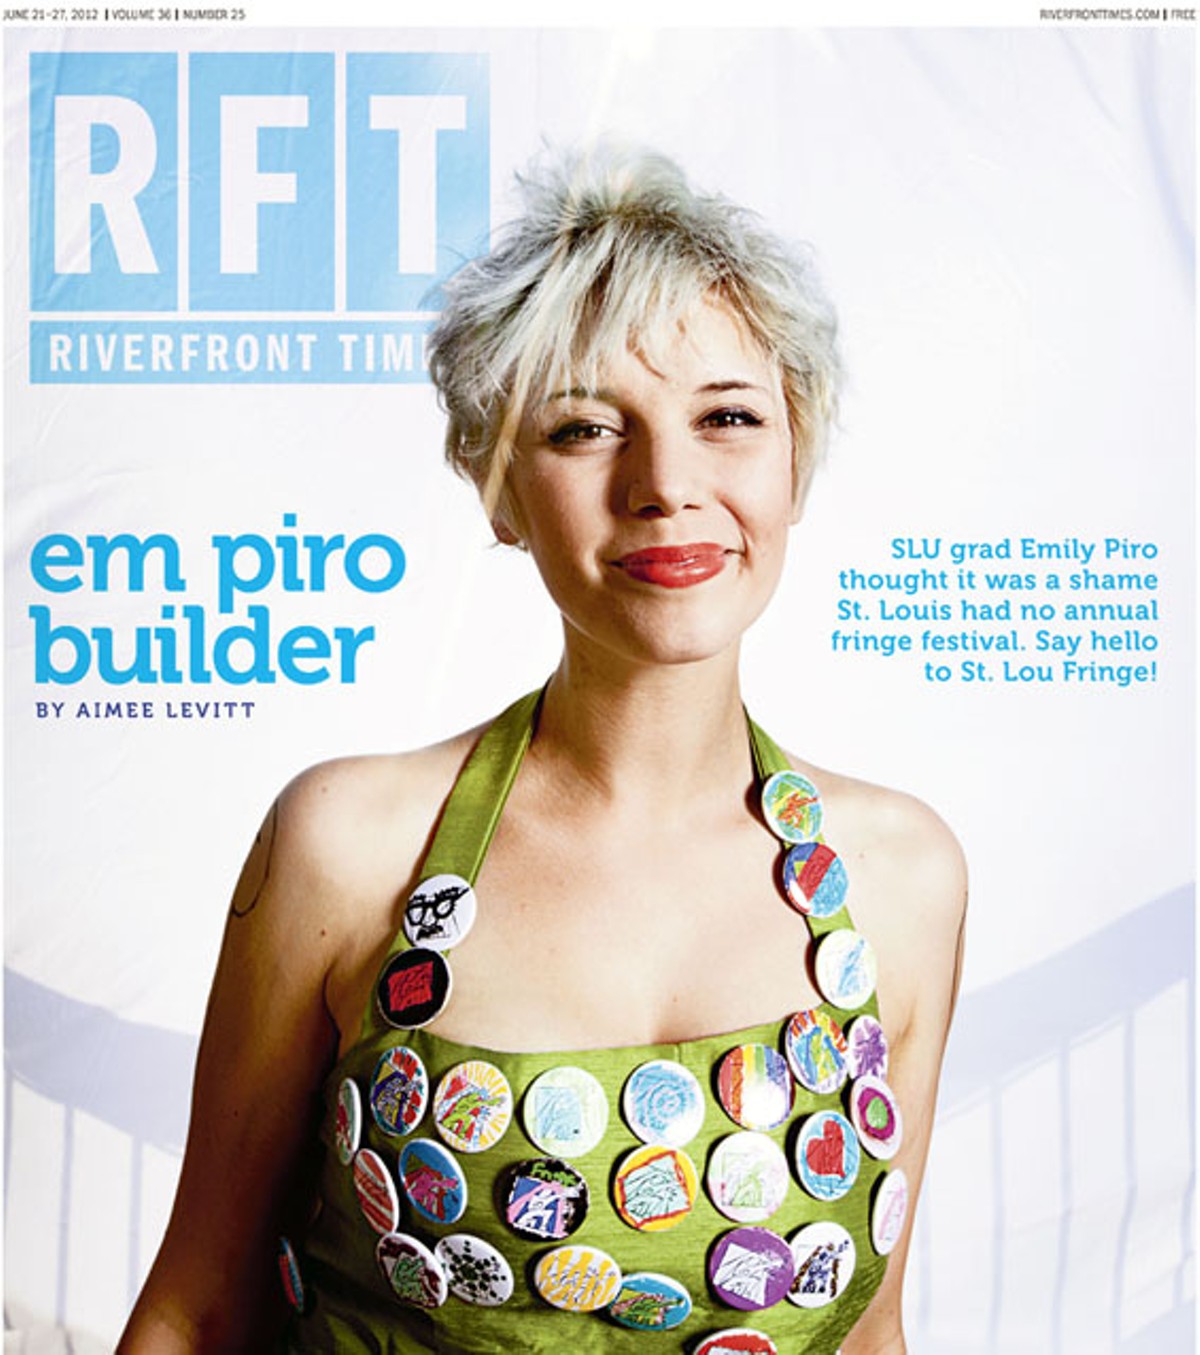 The Cover of the June 21 Print Edition